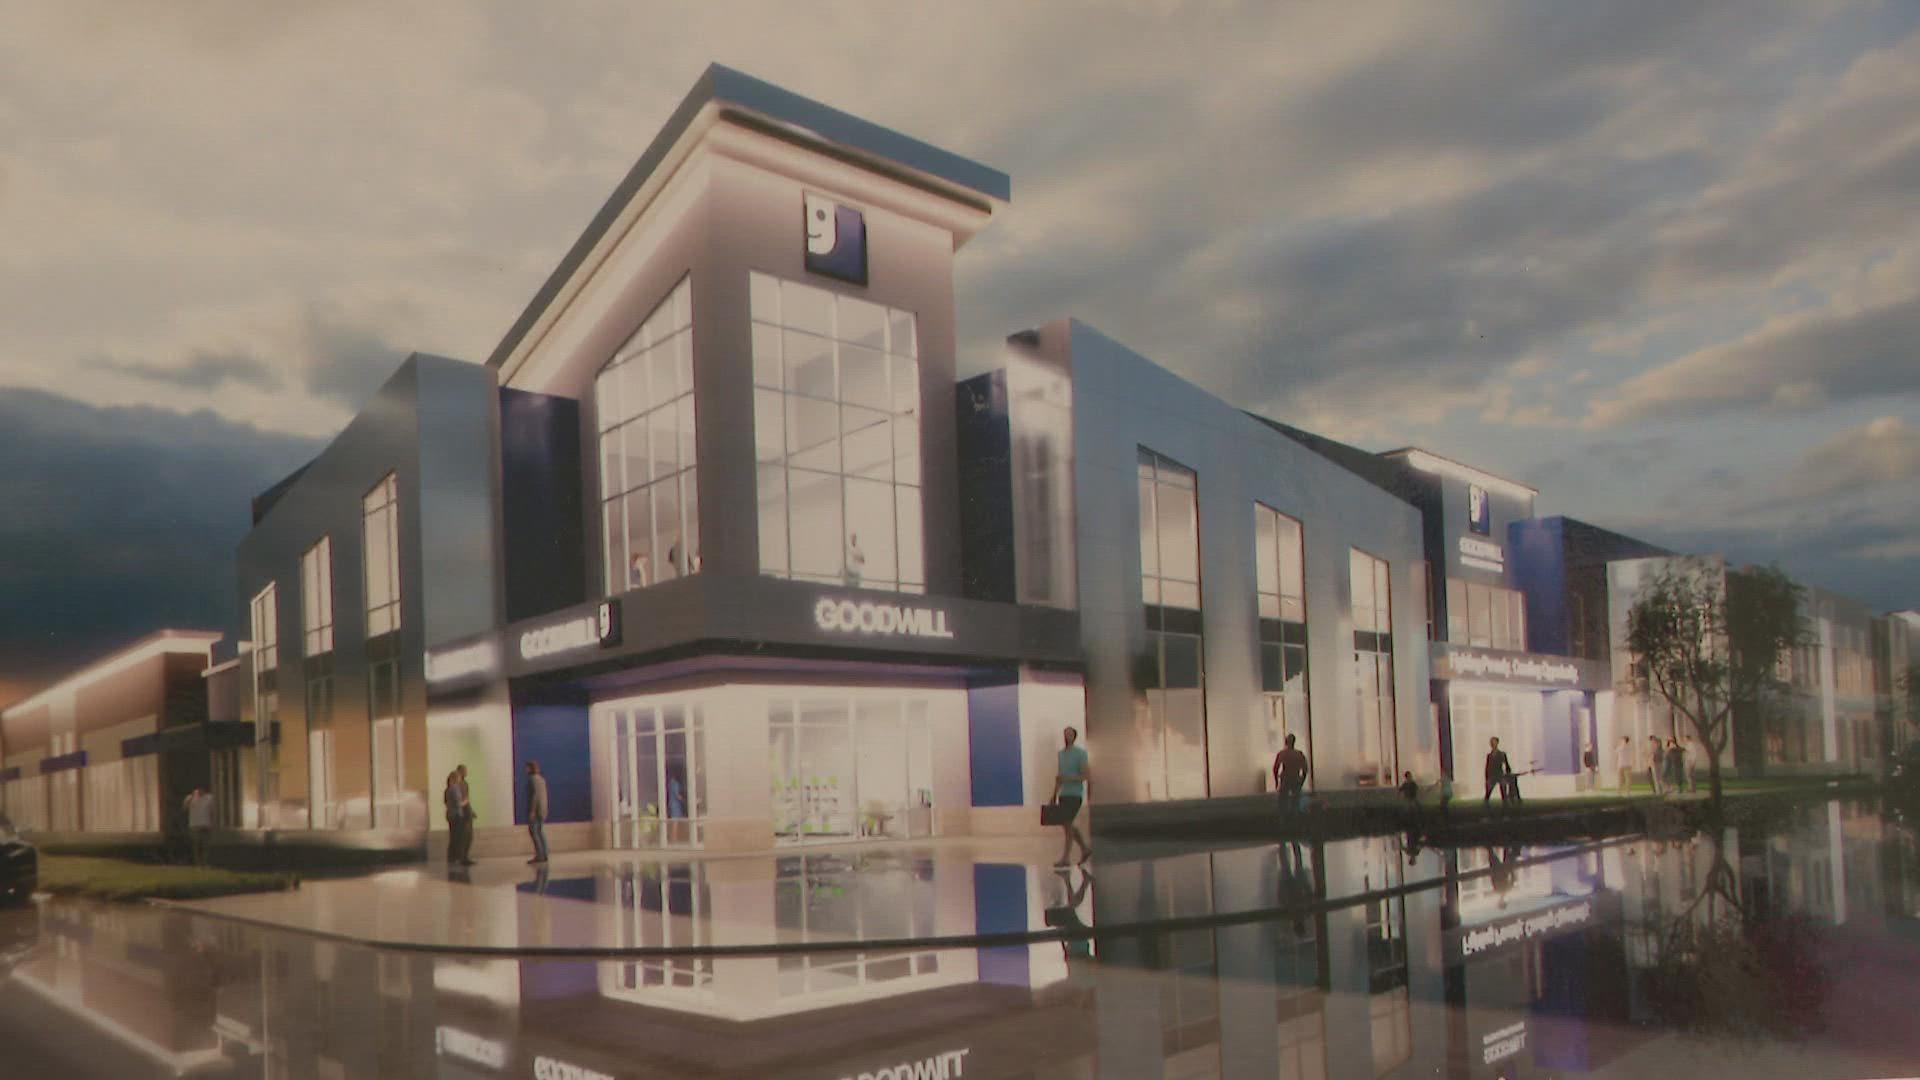 Goodwill Industries of Kentucky and Norton Healthcare are investing more than $100 million to transform a 20-acre site into the campus.